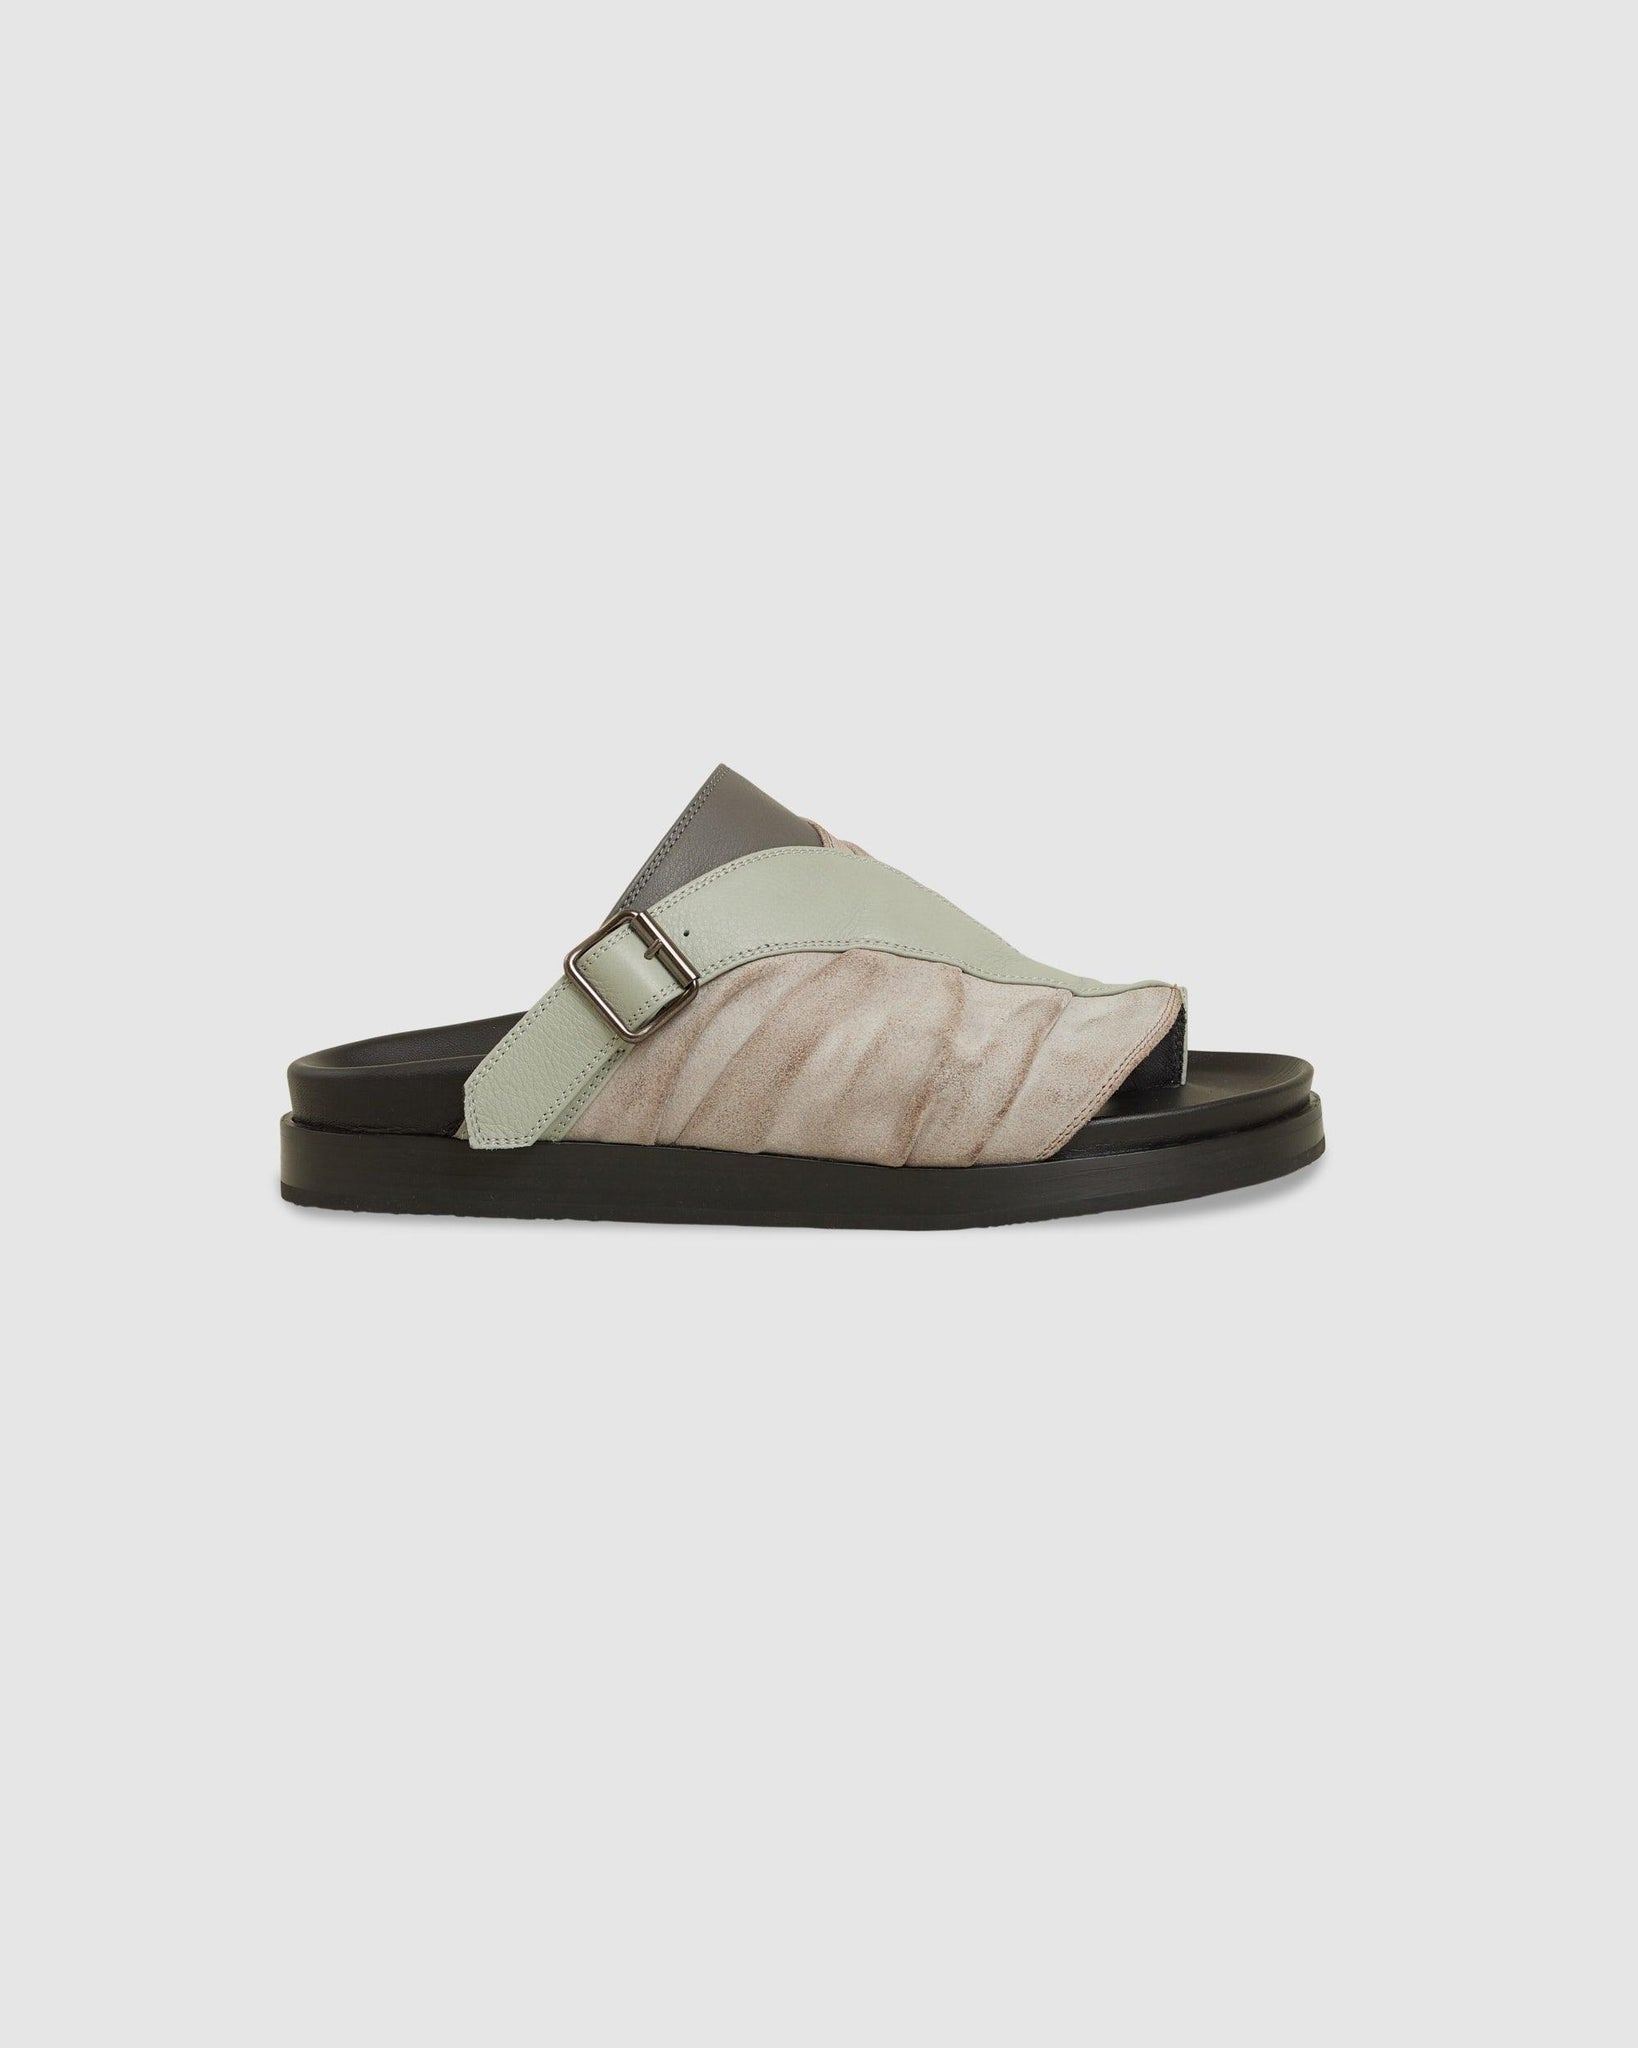 Valakas Sandal - {{ collection.title }} - Chinatown Country Club 